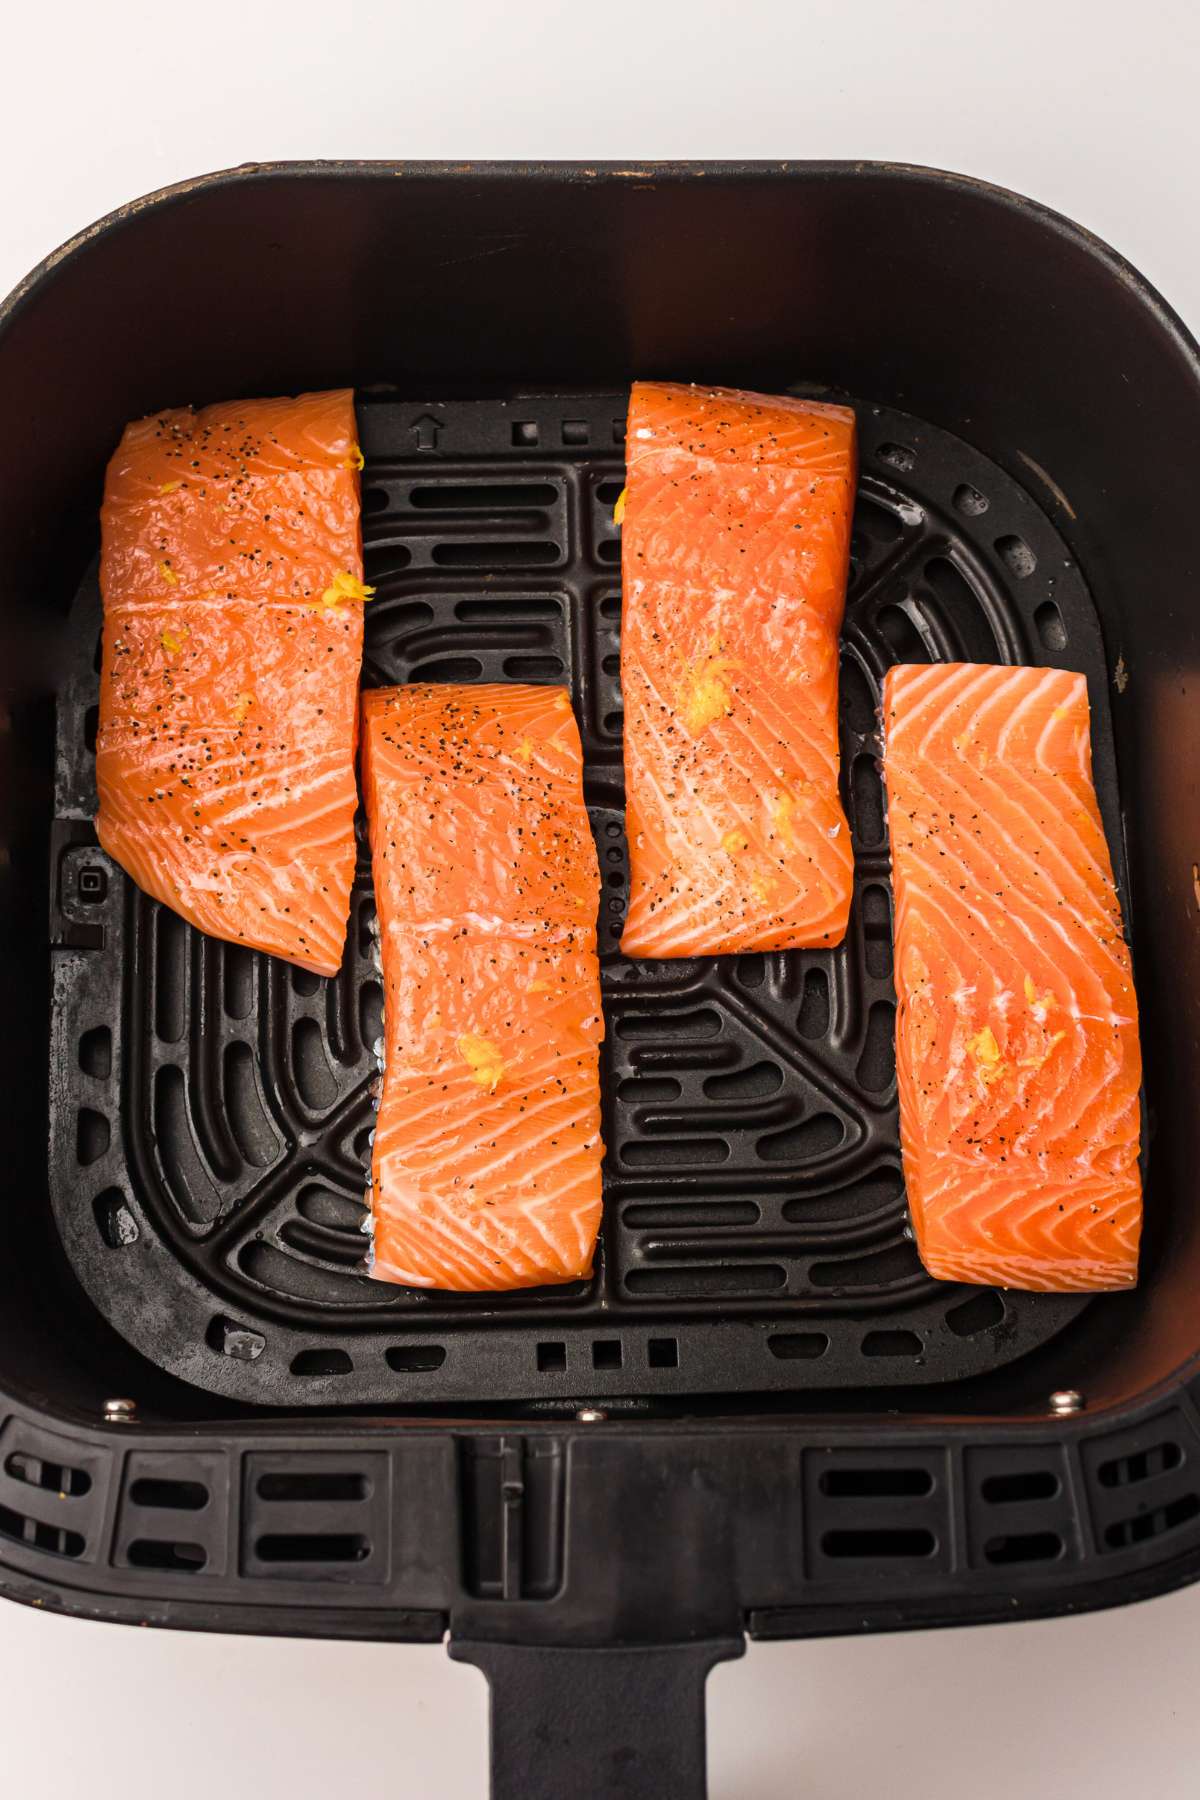 Uncooked salmon in air fryer basket.